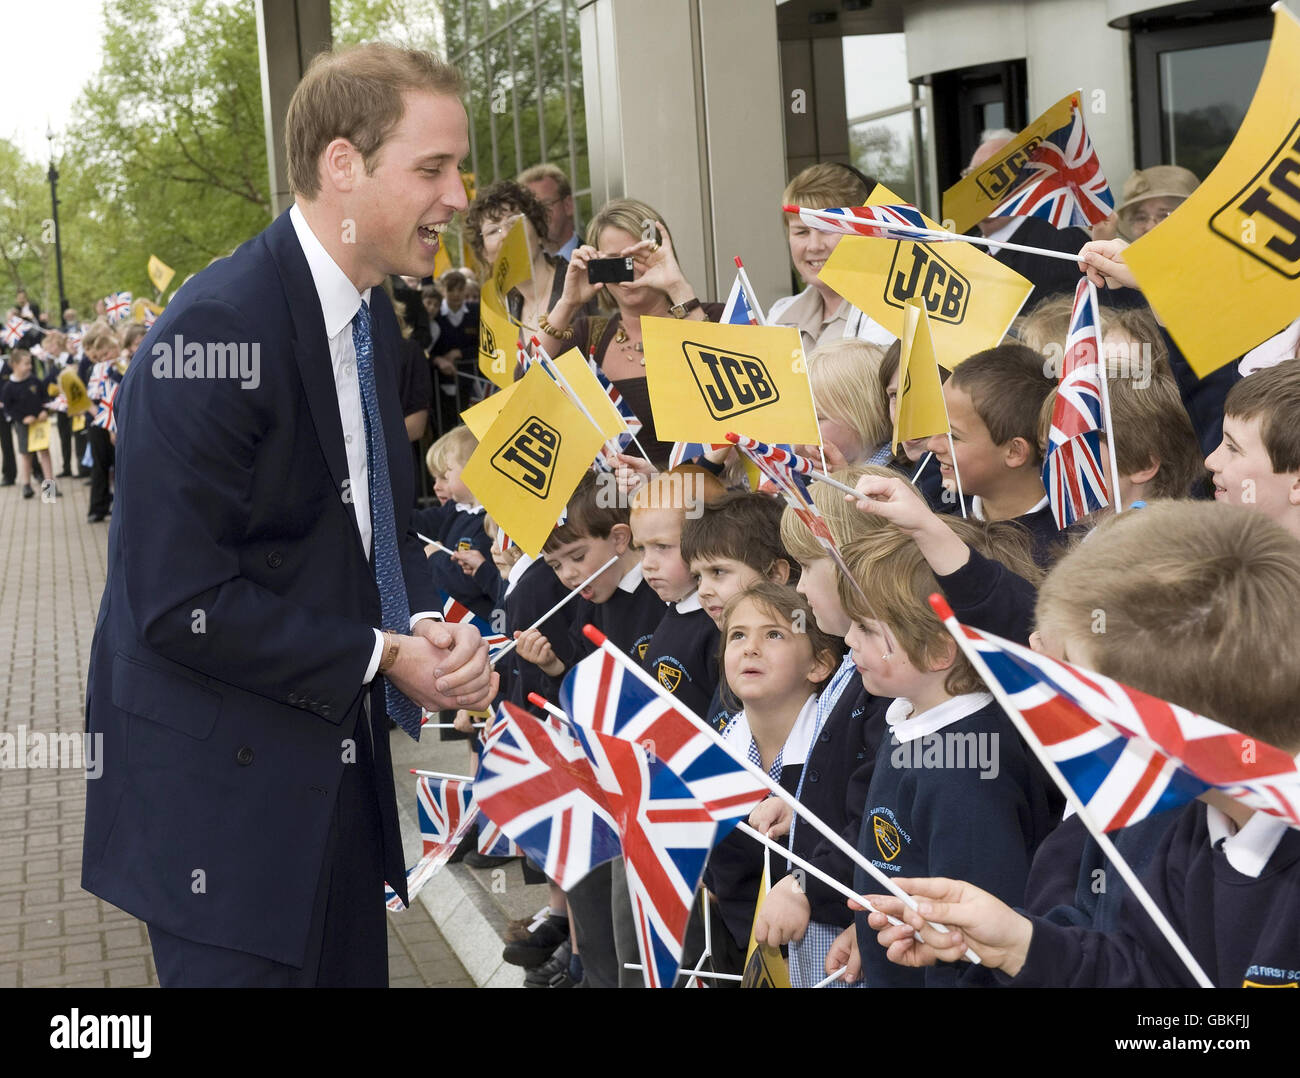 Prince William visits the World Headquarters of JCB, one of the world's largest manufacturers of construction equipment, to mark the production of the company's 750,000th machine at JC Bamford Excavators Ltd, Rocester, Staffordshire. Stock Photo